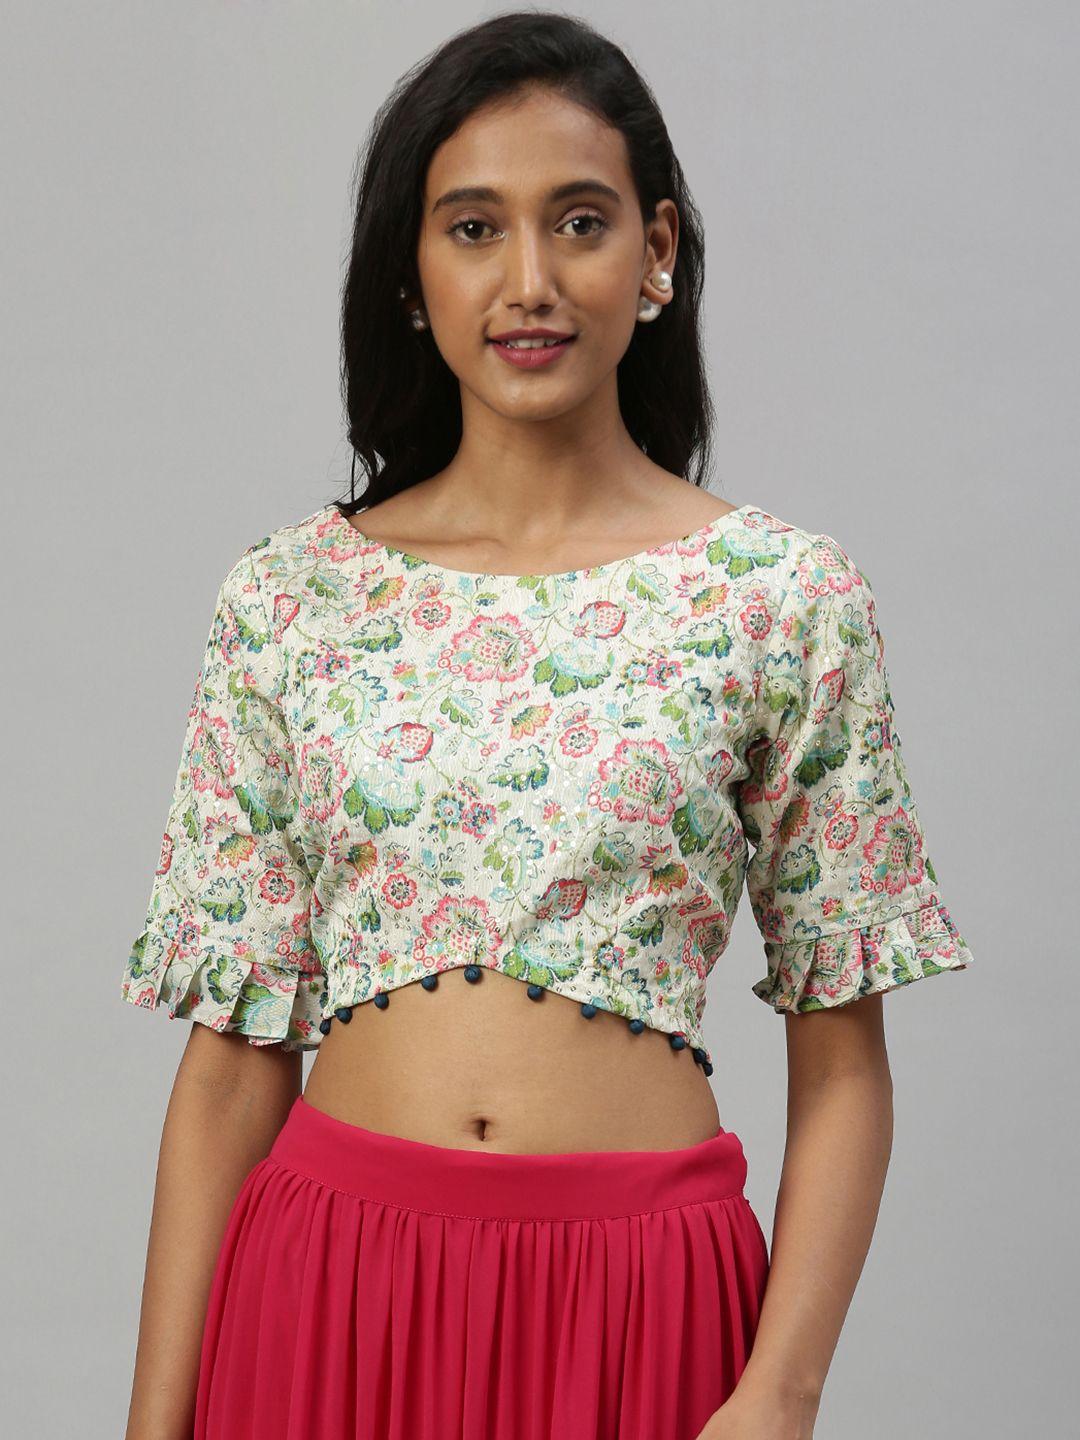 inddus women cream-coloured & green floral printed ethnic crop top